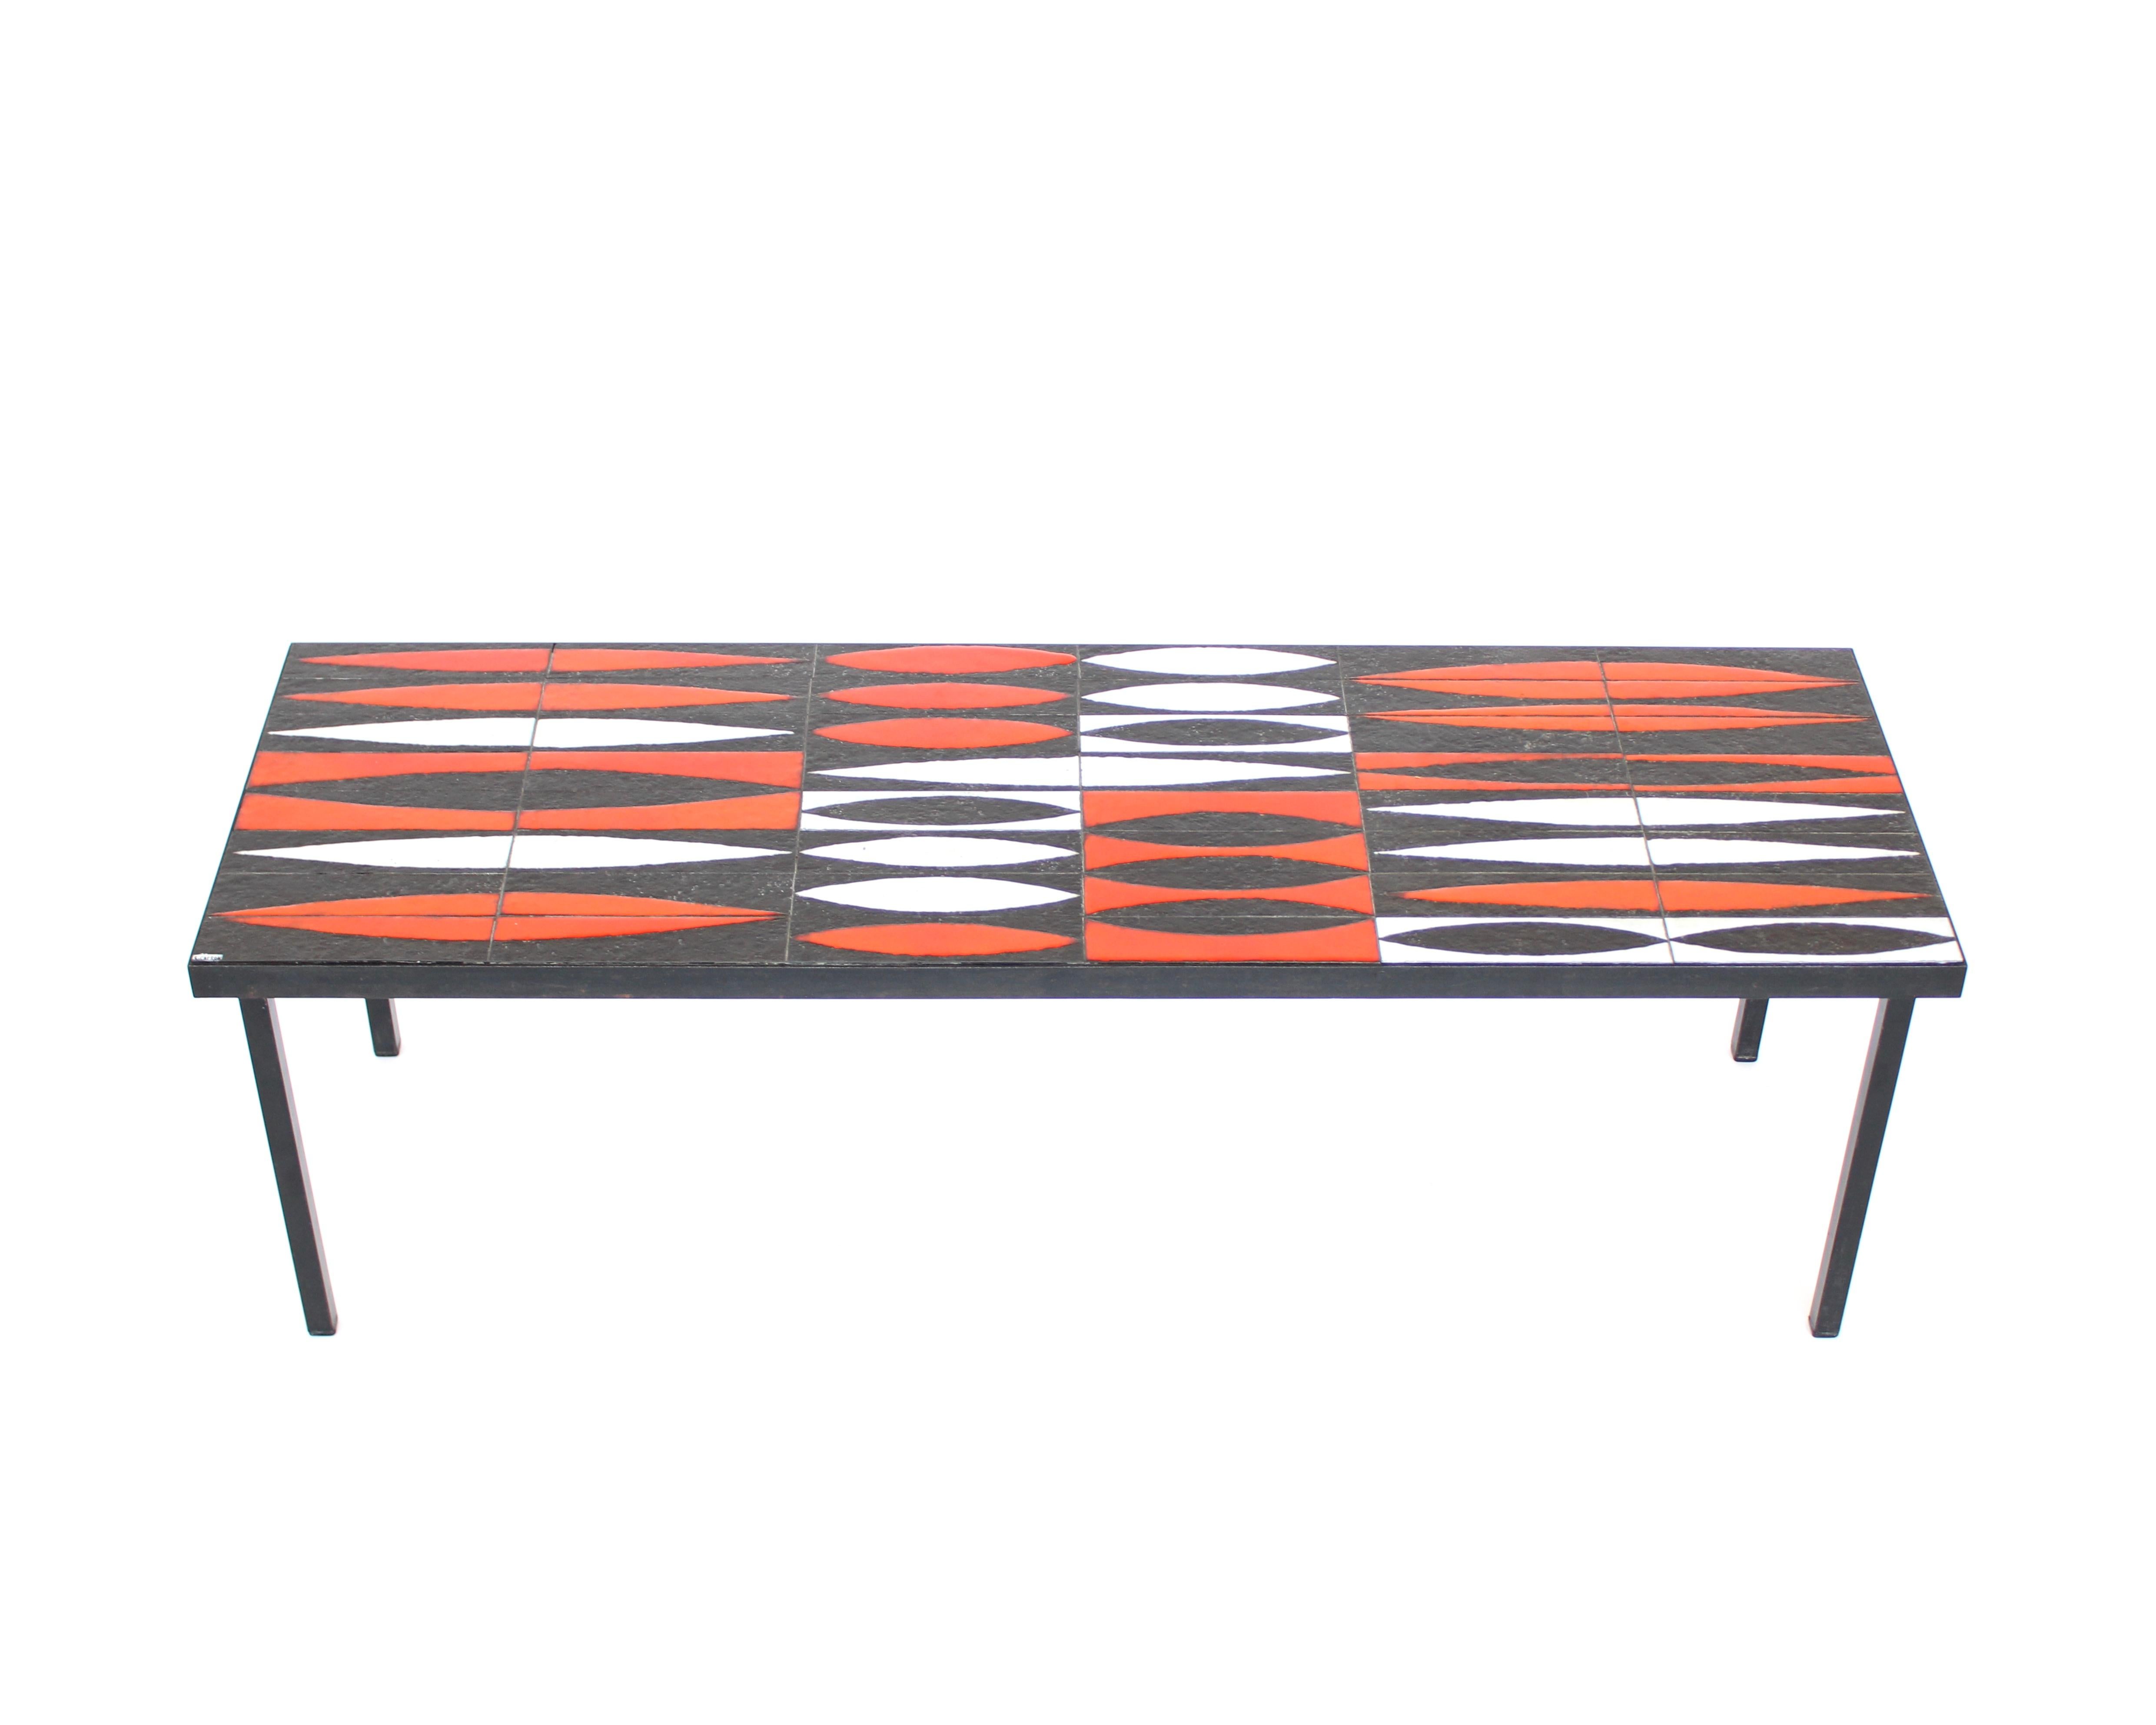 Mid-20th Century Roger Capron Navette Red, Orange, Black and White French Ceramic Coffee Table